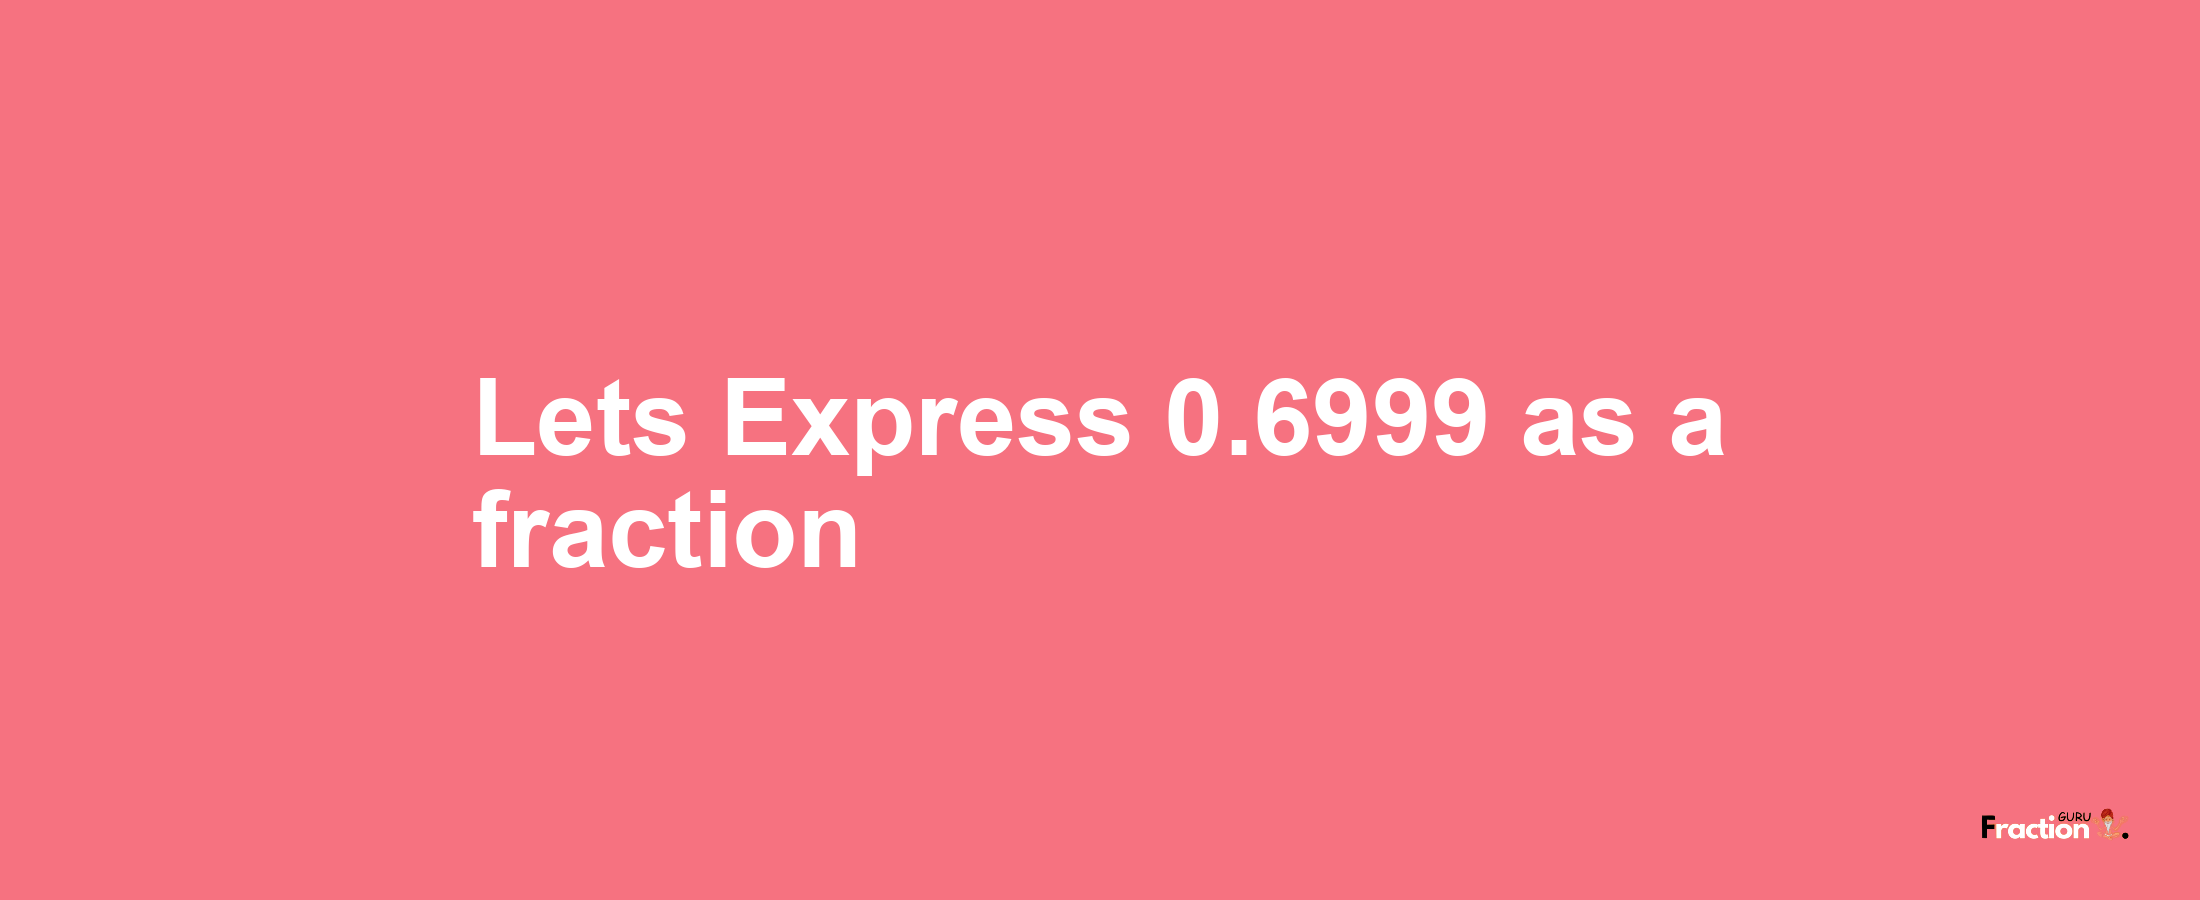 Lets Express 0.6999 as afraction